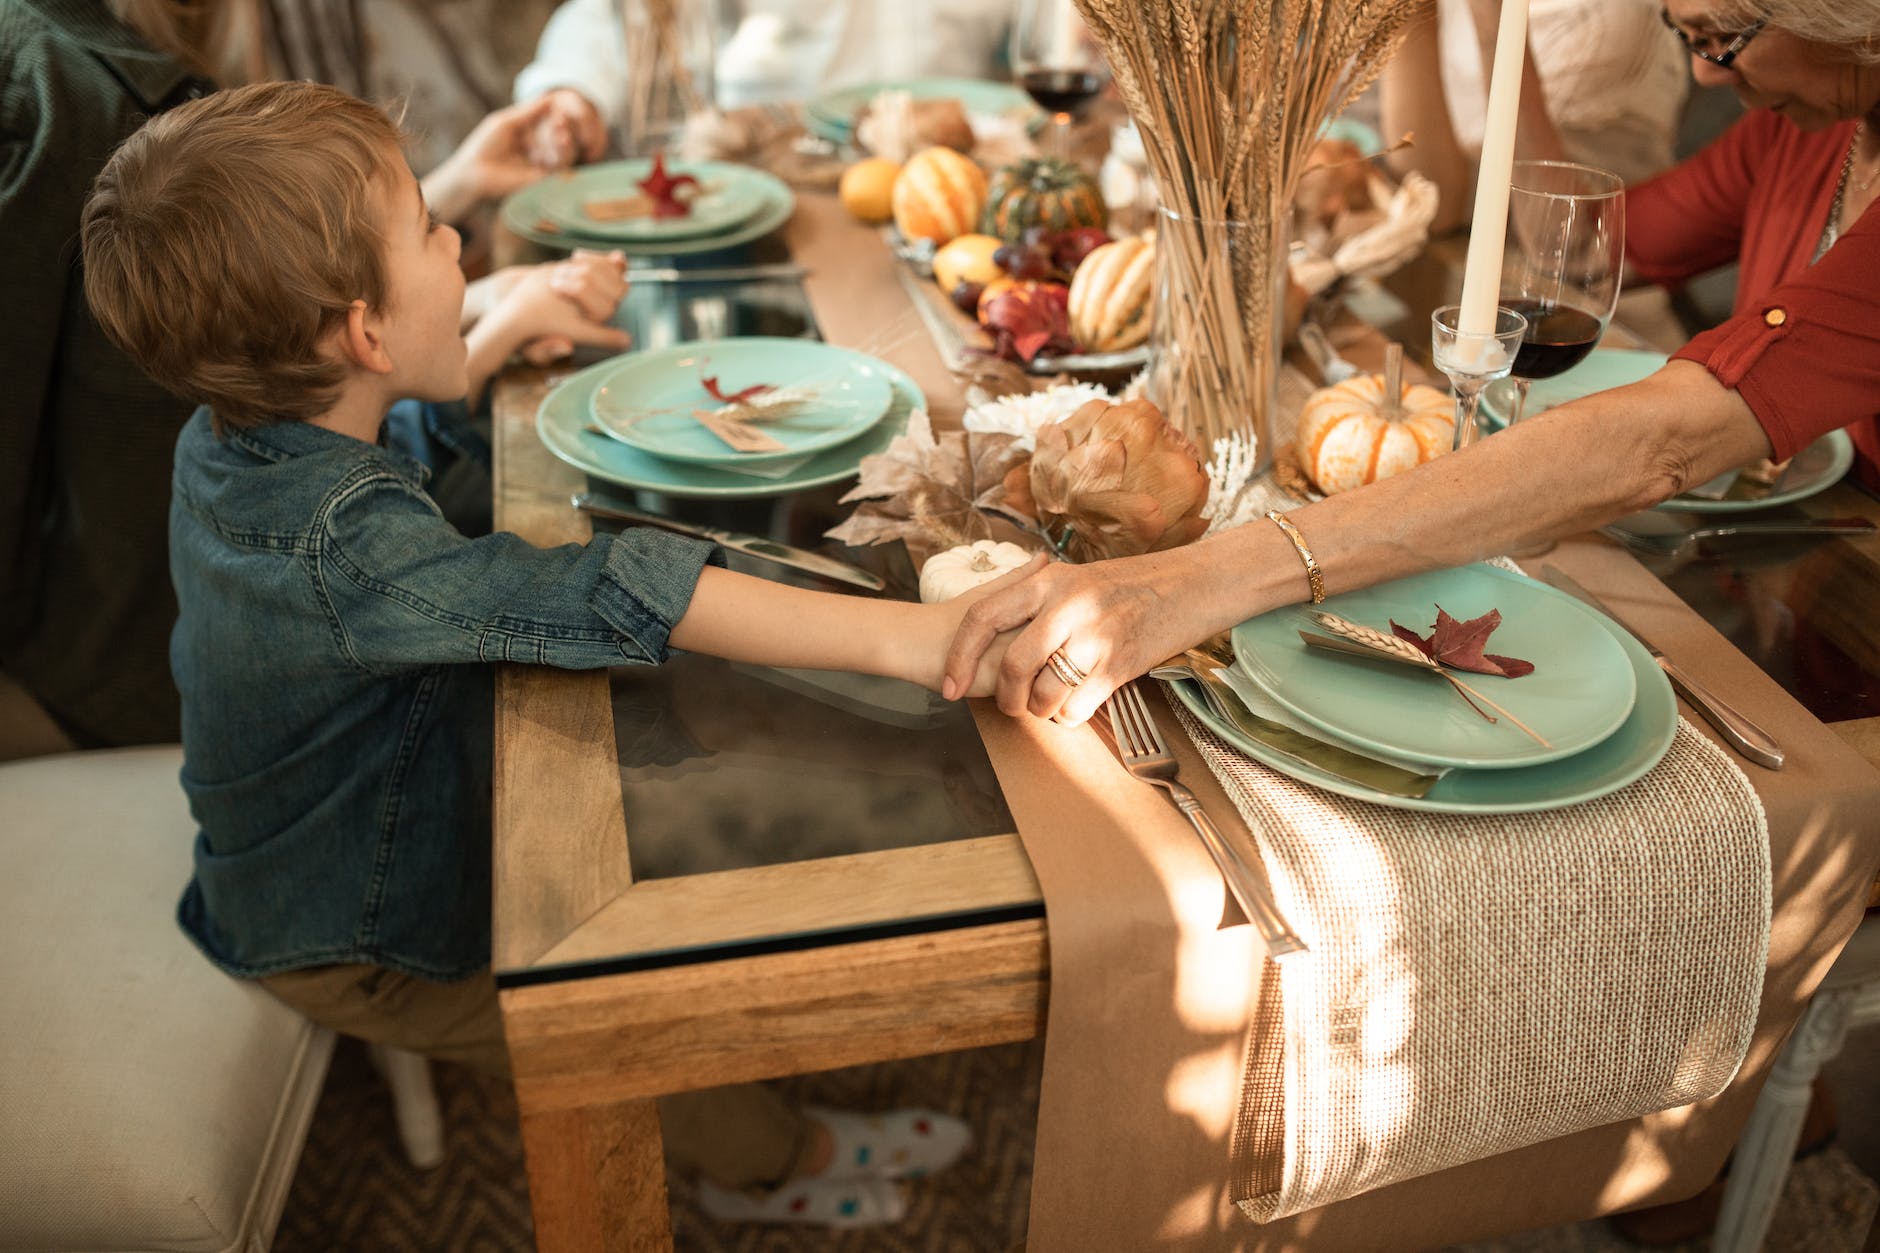 a family holding their hands praying and sitting together on a dining table